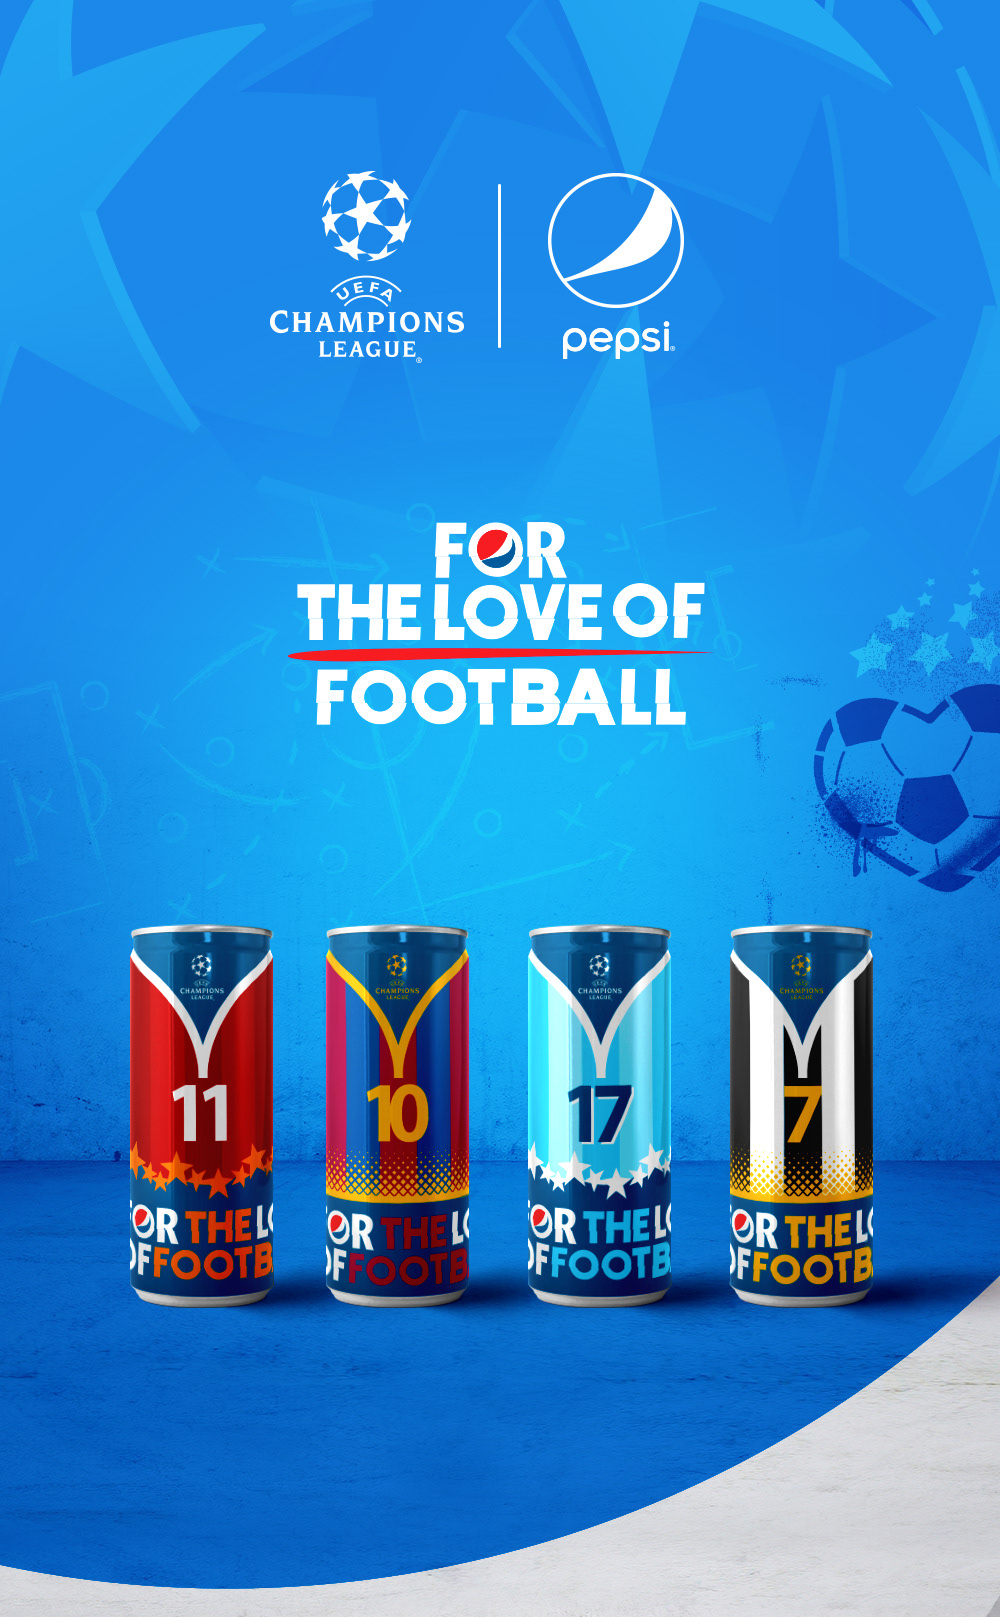 can Champions cool football goal league Love pepsi soccer UCL